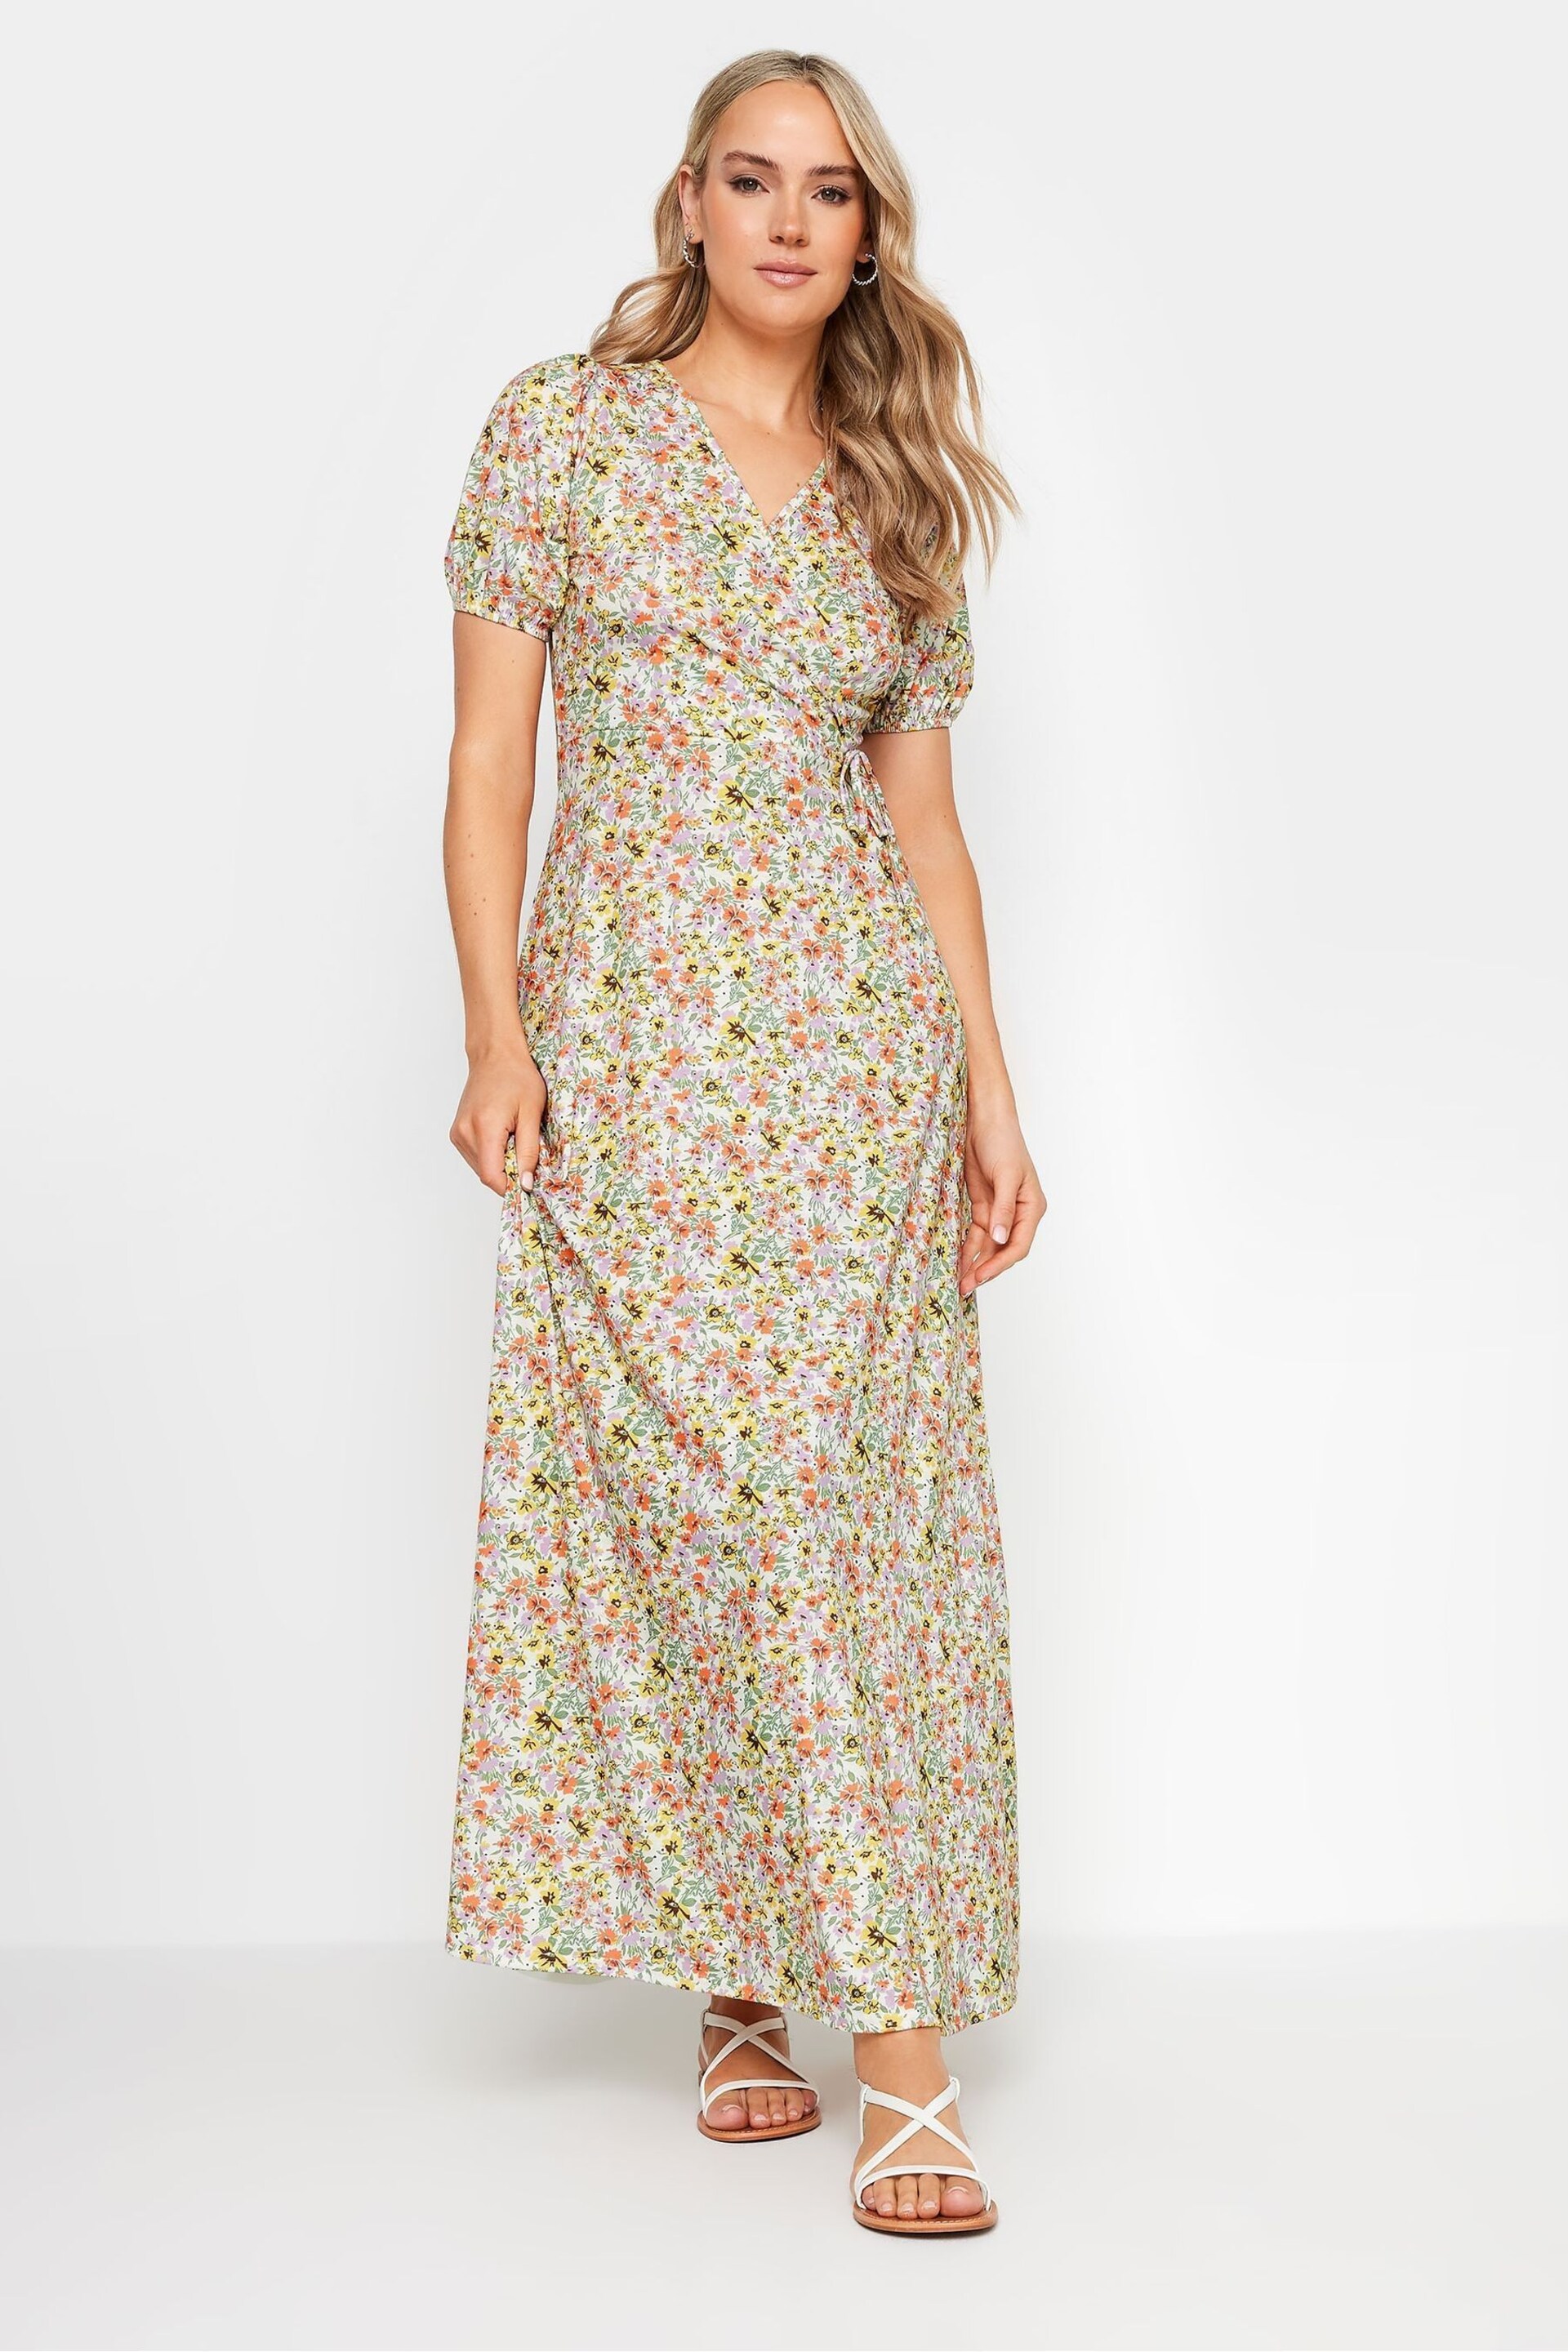 Long Tall Sally Pink Pastel Vintage Floral Wrap Maxi Dress - Image 1 of 5